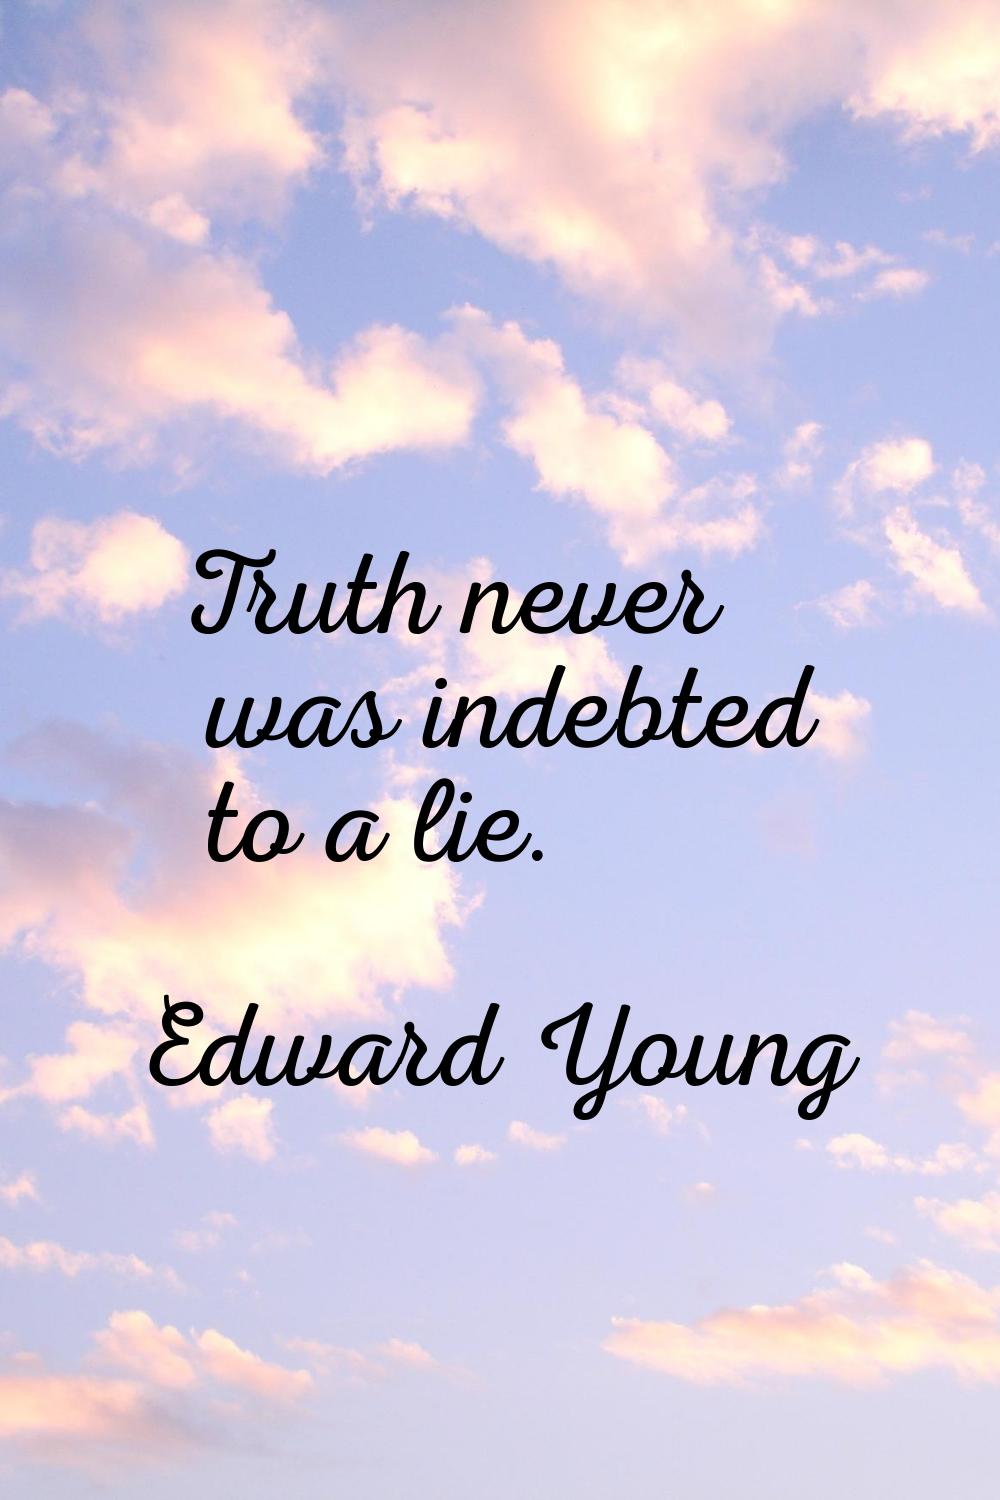 Truth never was indebted to a lie.